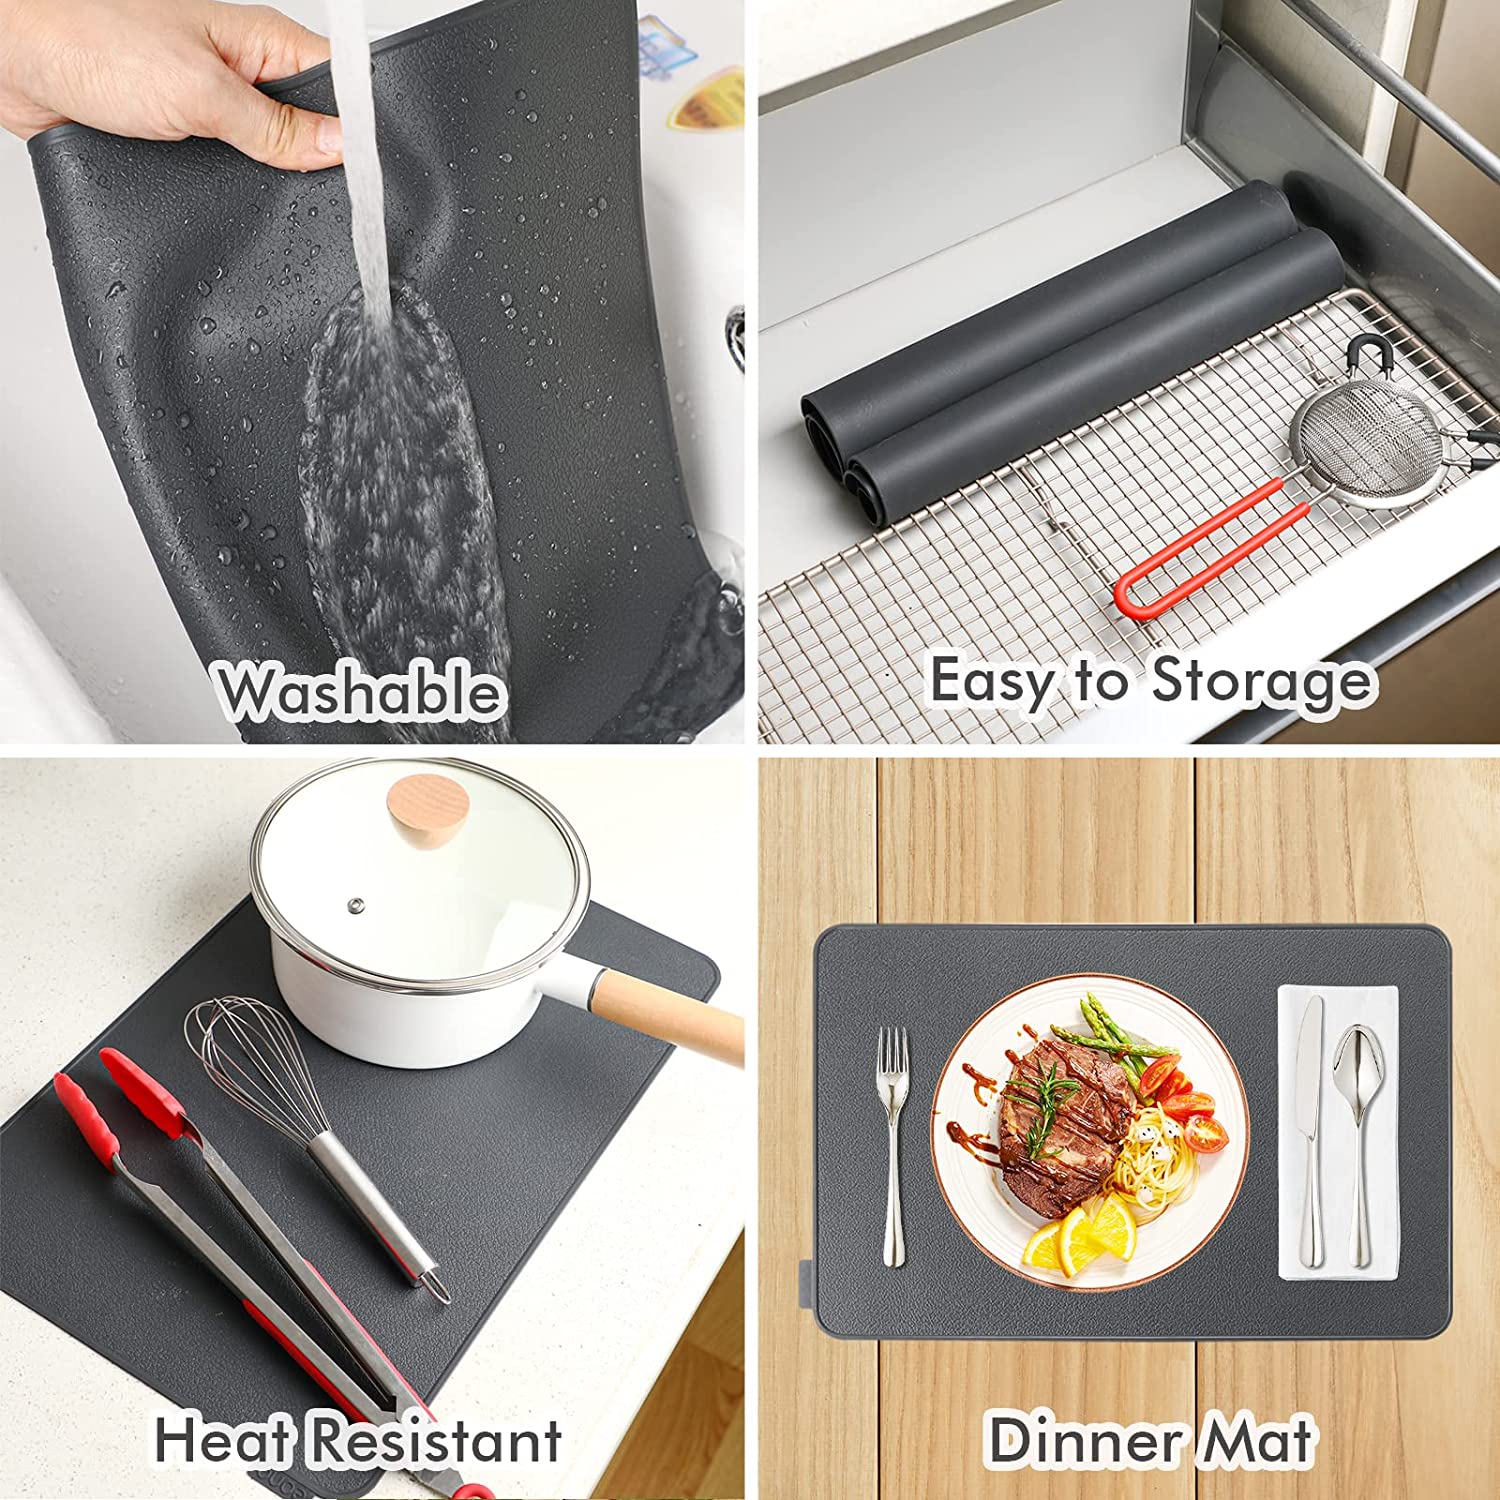 Extra Large Silicone Table Mat, Silicone Mat for Crafts Kids Dinner Placemat Desk Countertop Waterproof Protector Heat Insulation Kitchen Pastry